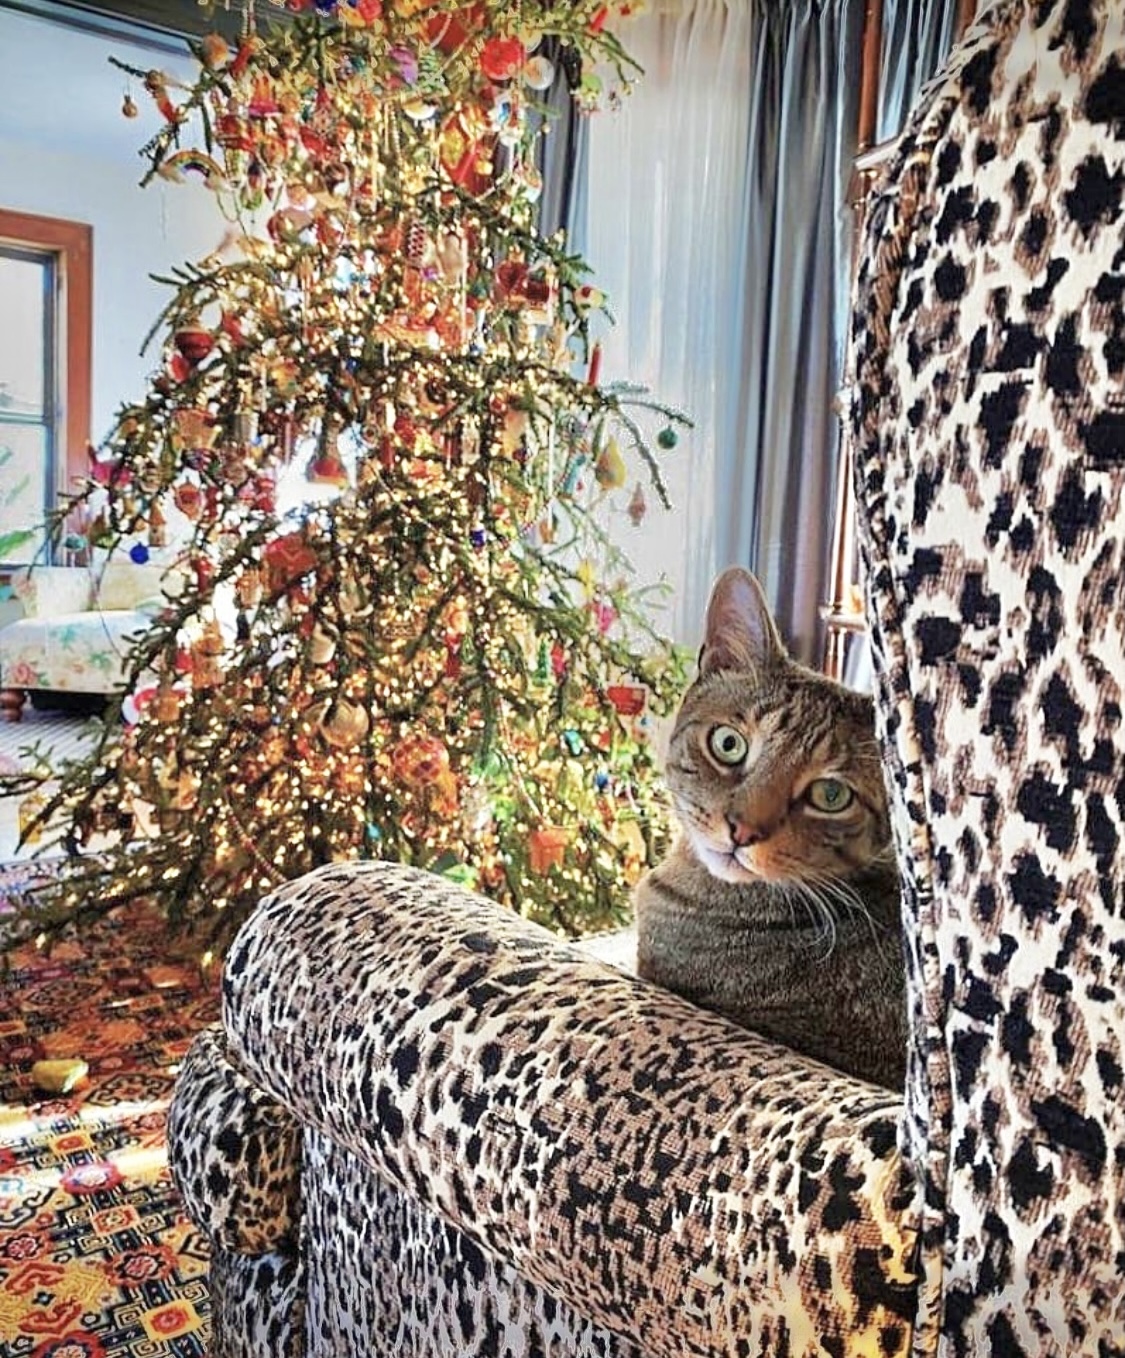 Judgy cat on a leopard print chair and a fabulous Christmas tree covered in vintage ornaments 